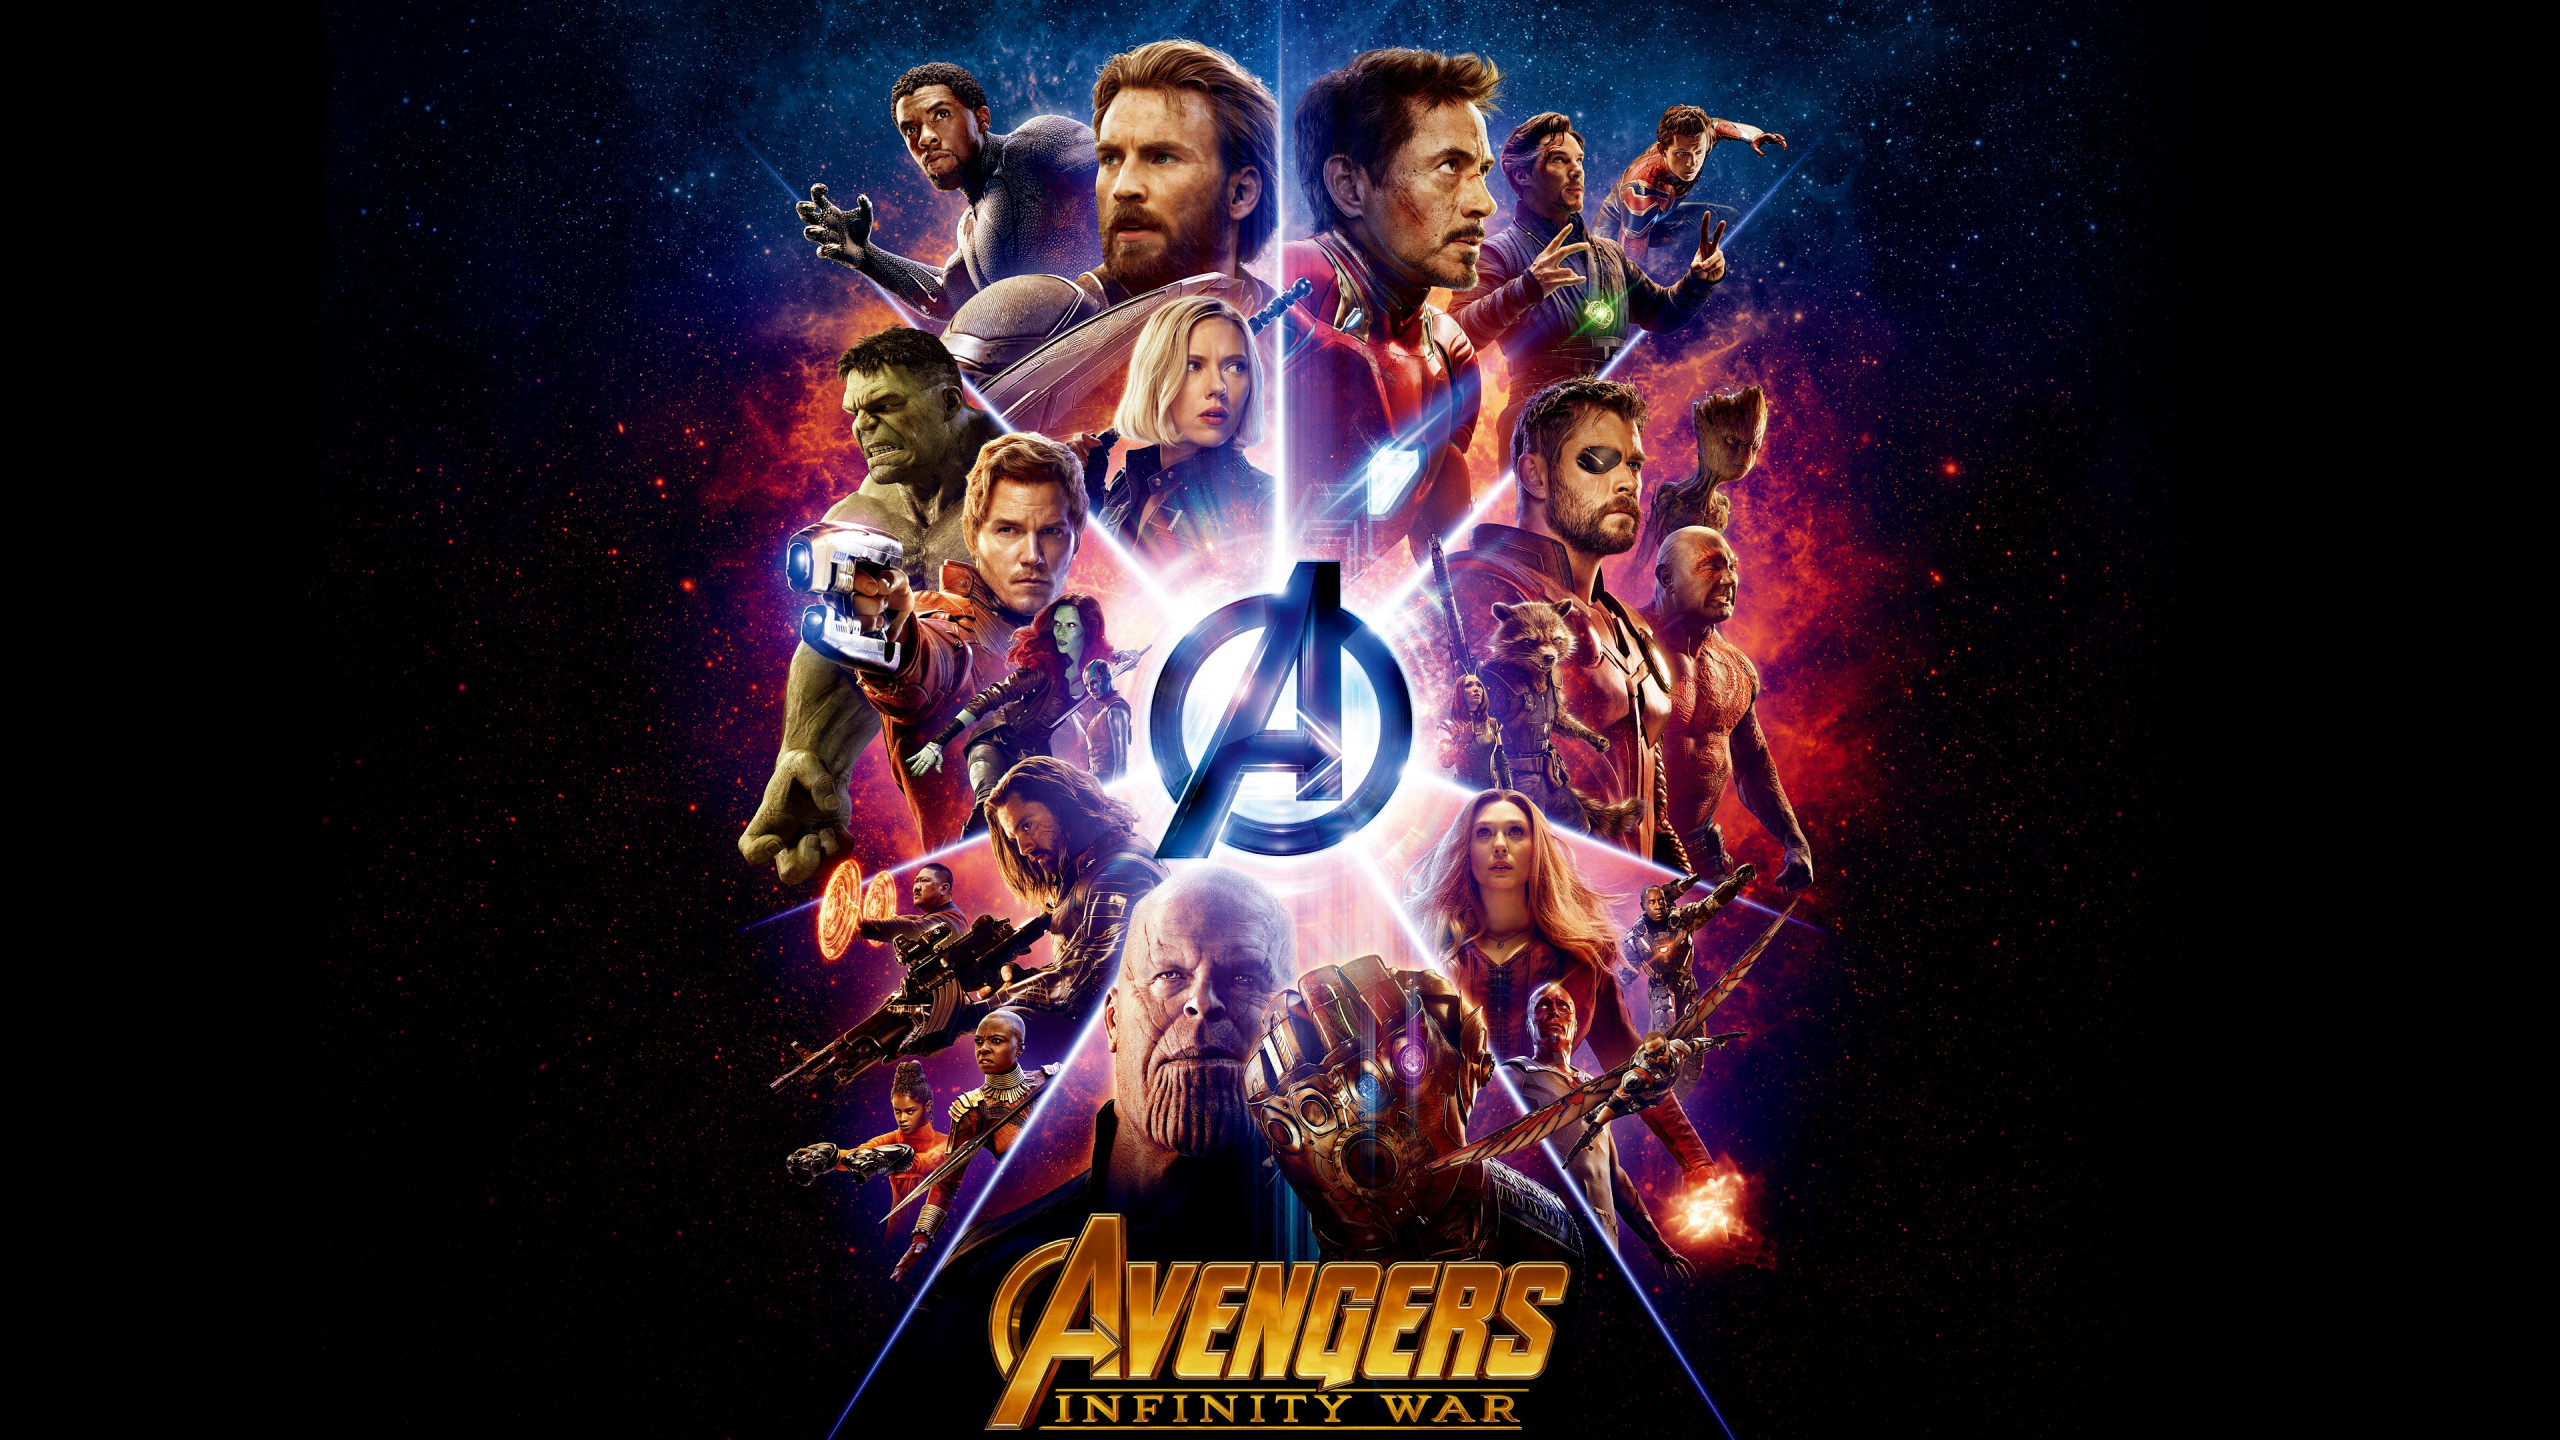 All the heroes from Avengers: Infinity War wallpaper 2560x1440